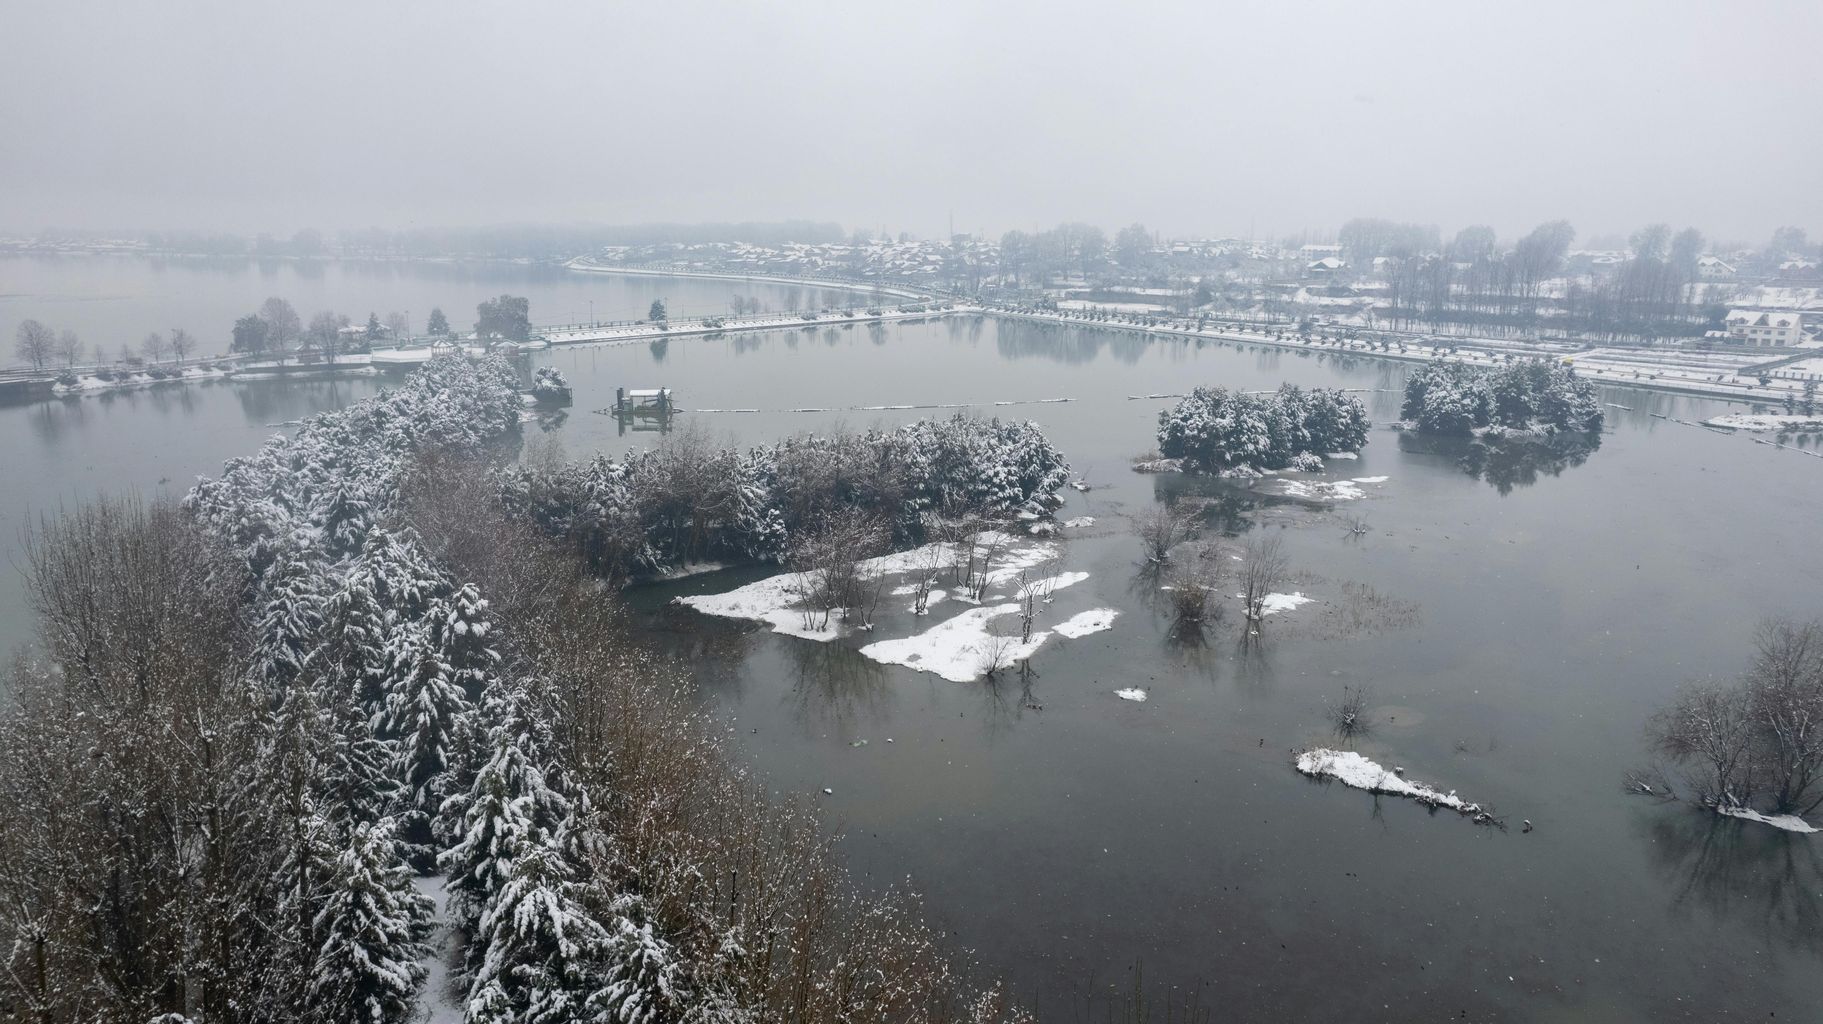 A flooded area in the middle of a snowy field